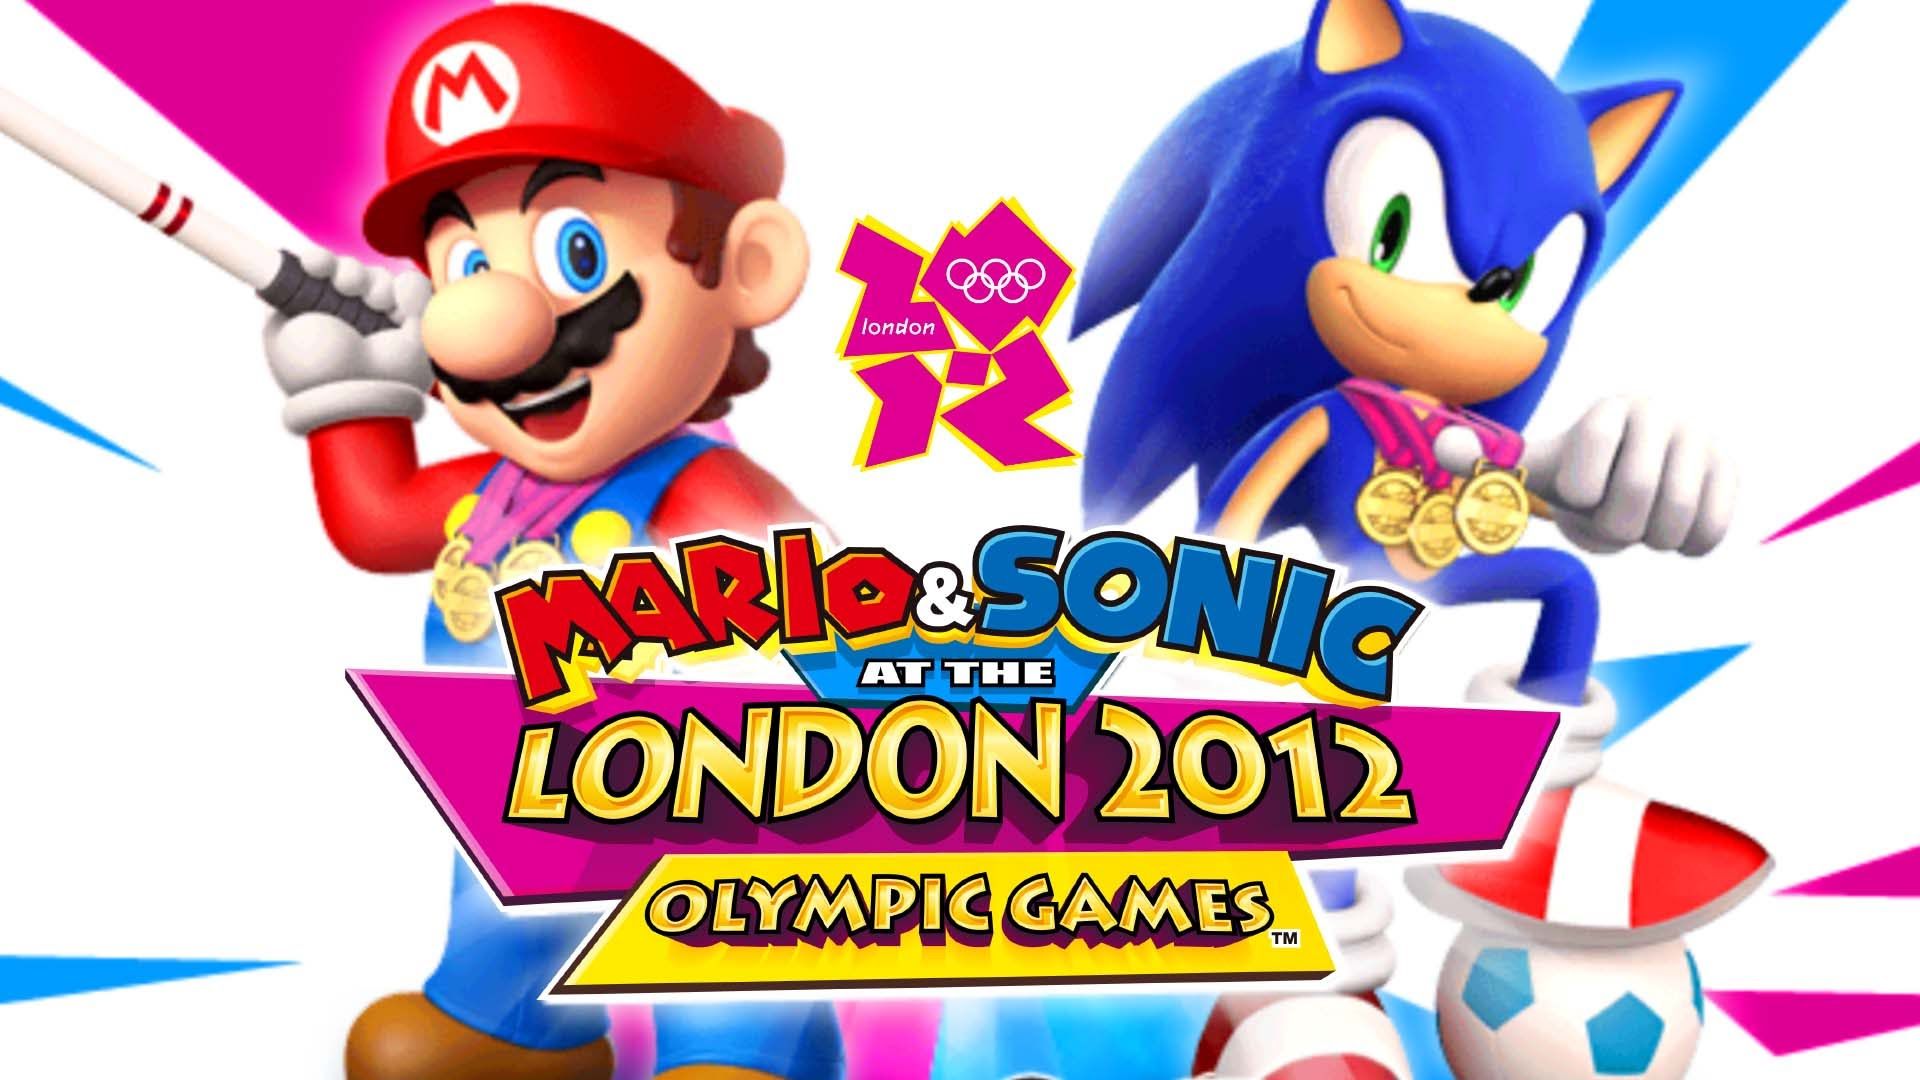 Mario & Sonic At The London 2012 Olympic Games wallpaper, Video